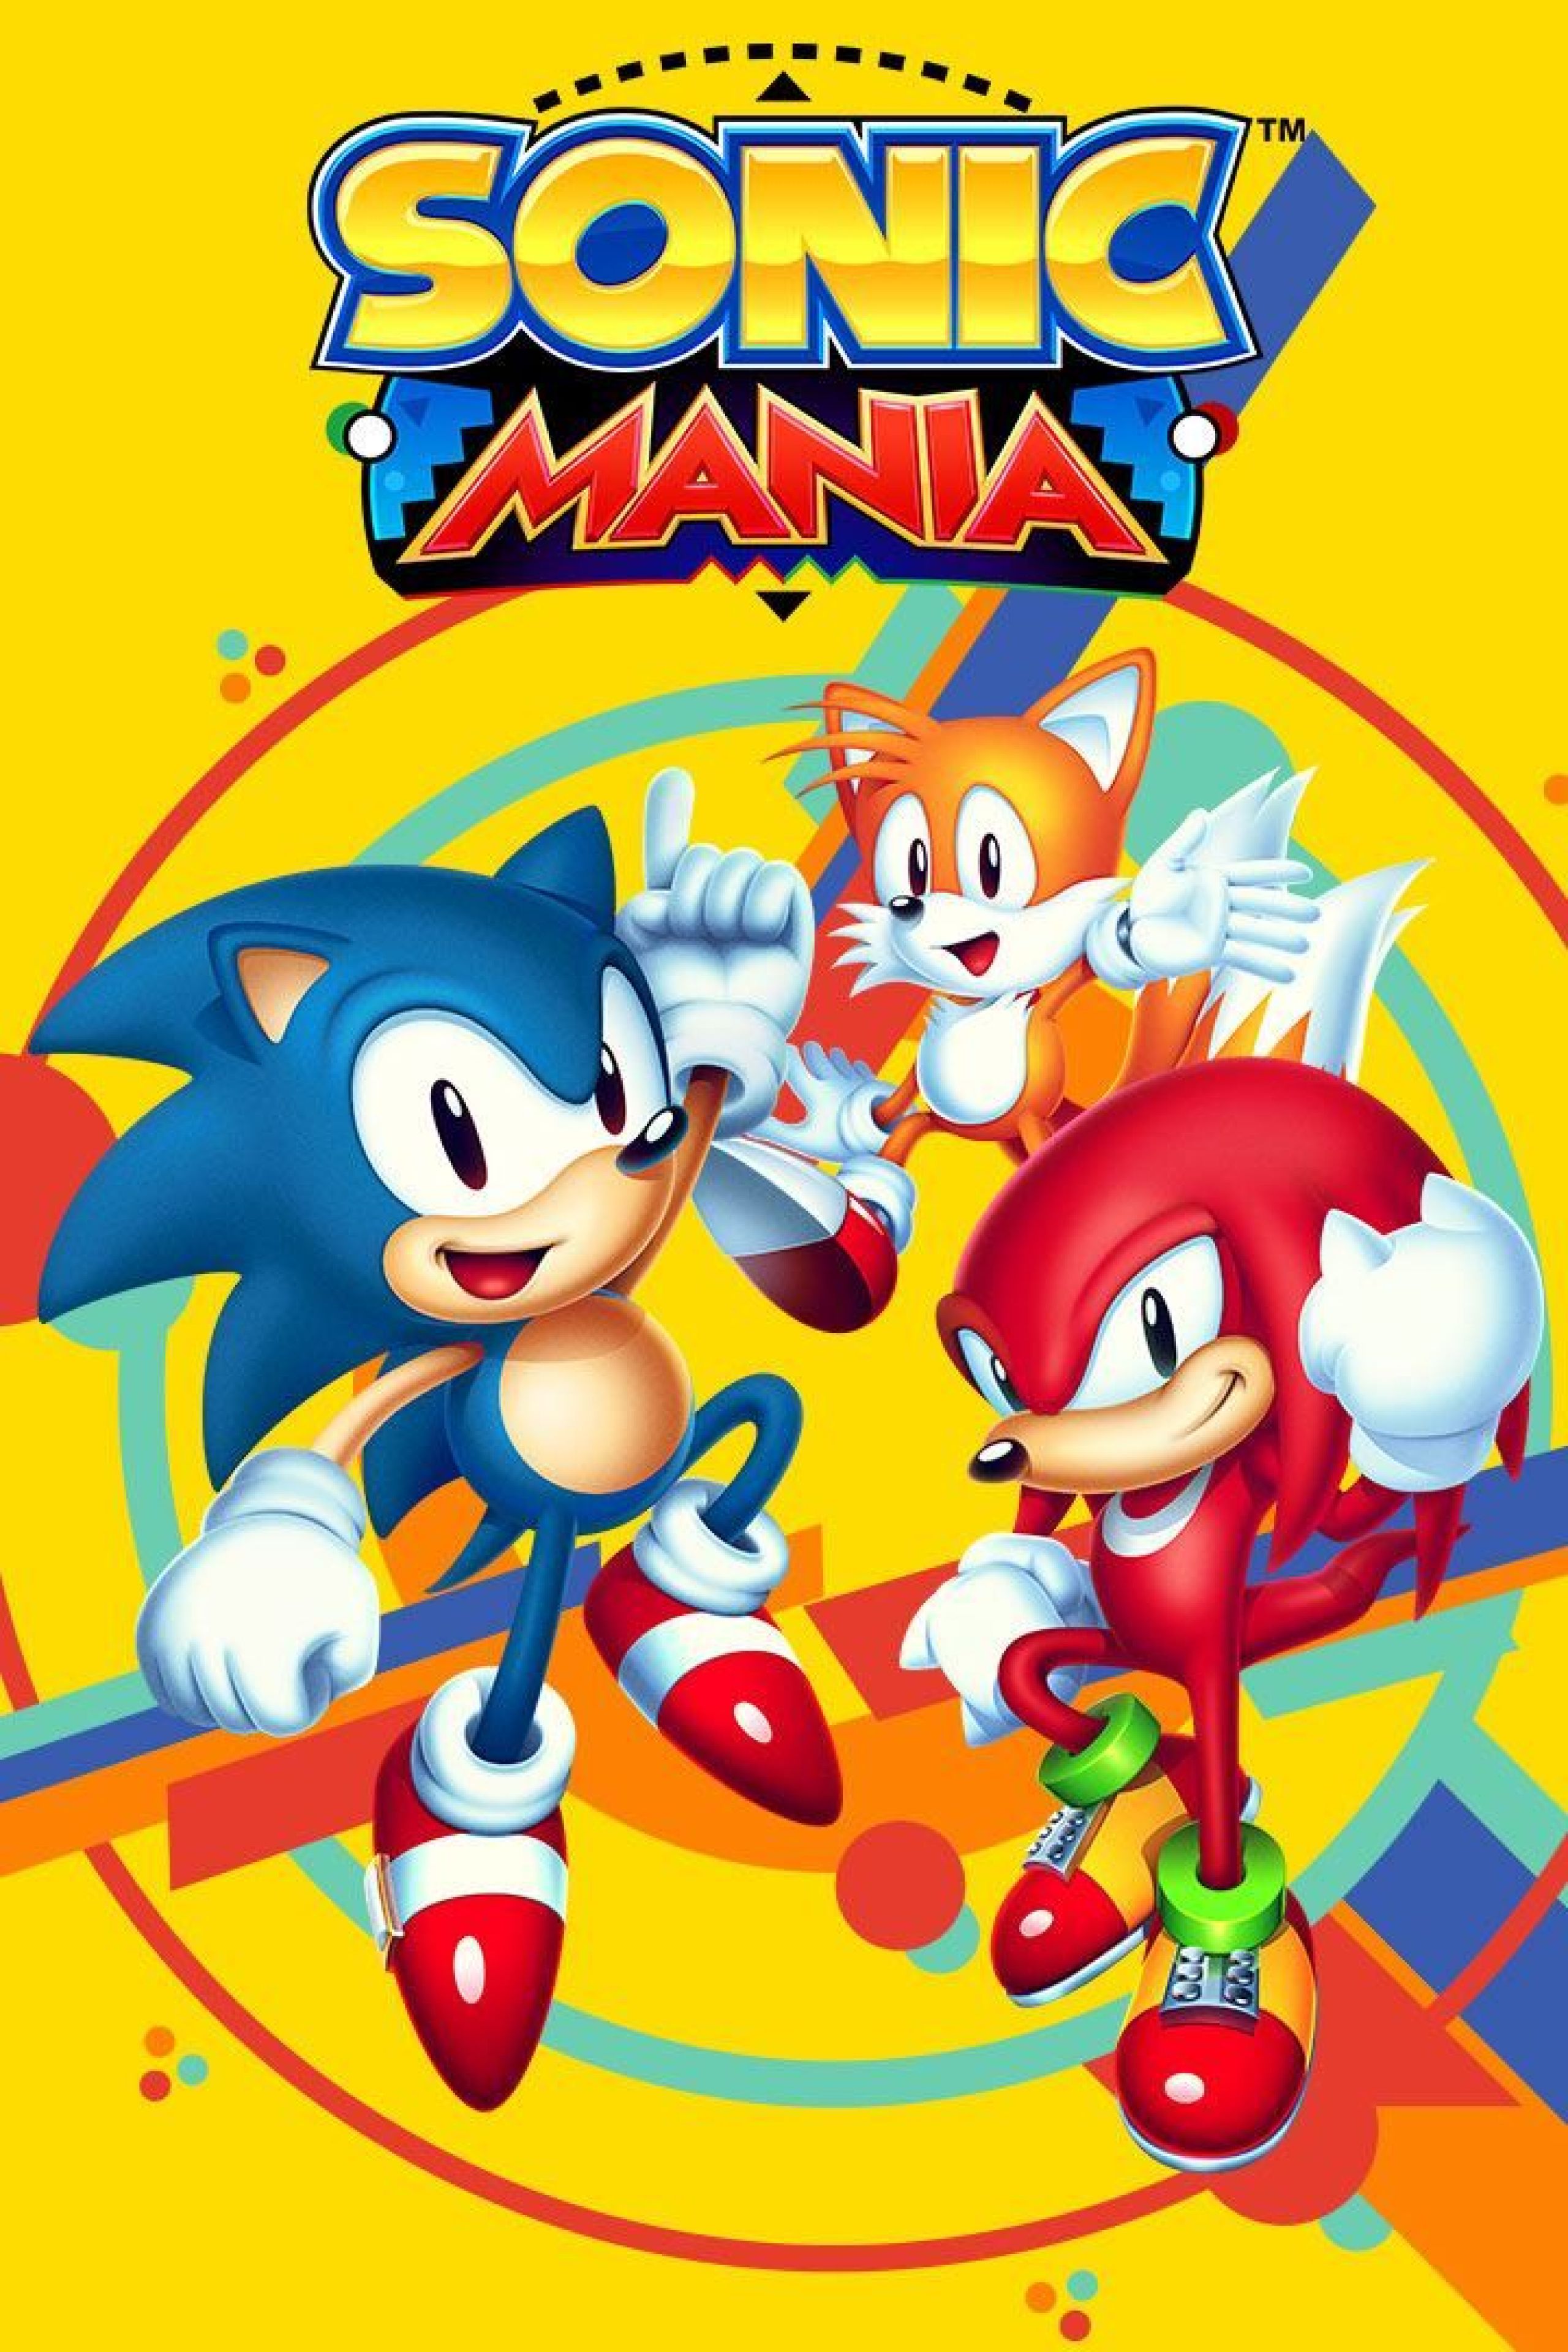 sonic mania on crazy games